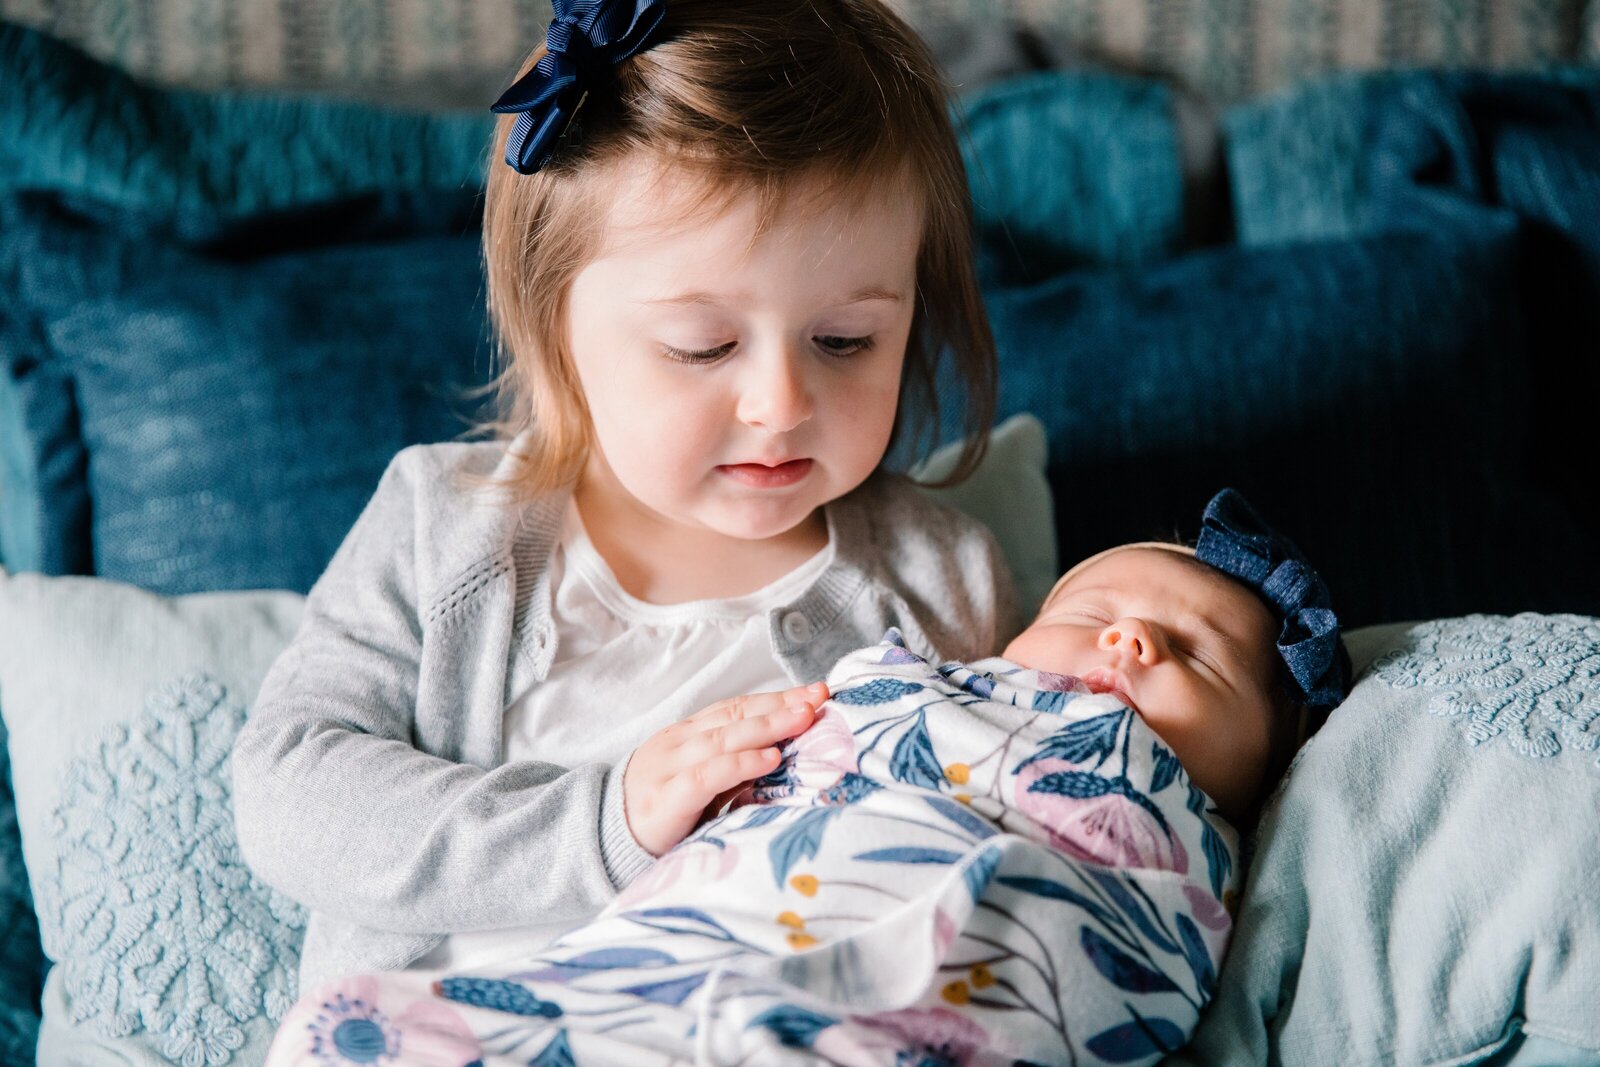 Three year old sister holding newborn sibling during in-home newborn photography session.